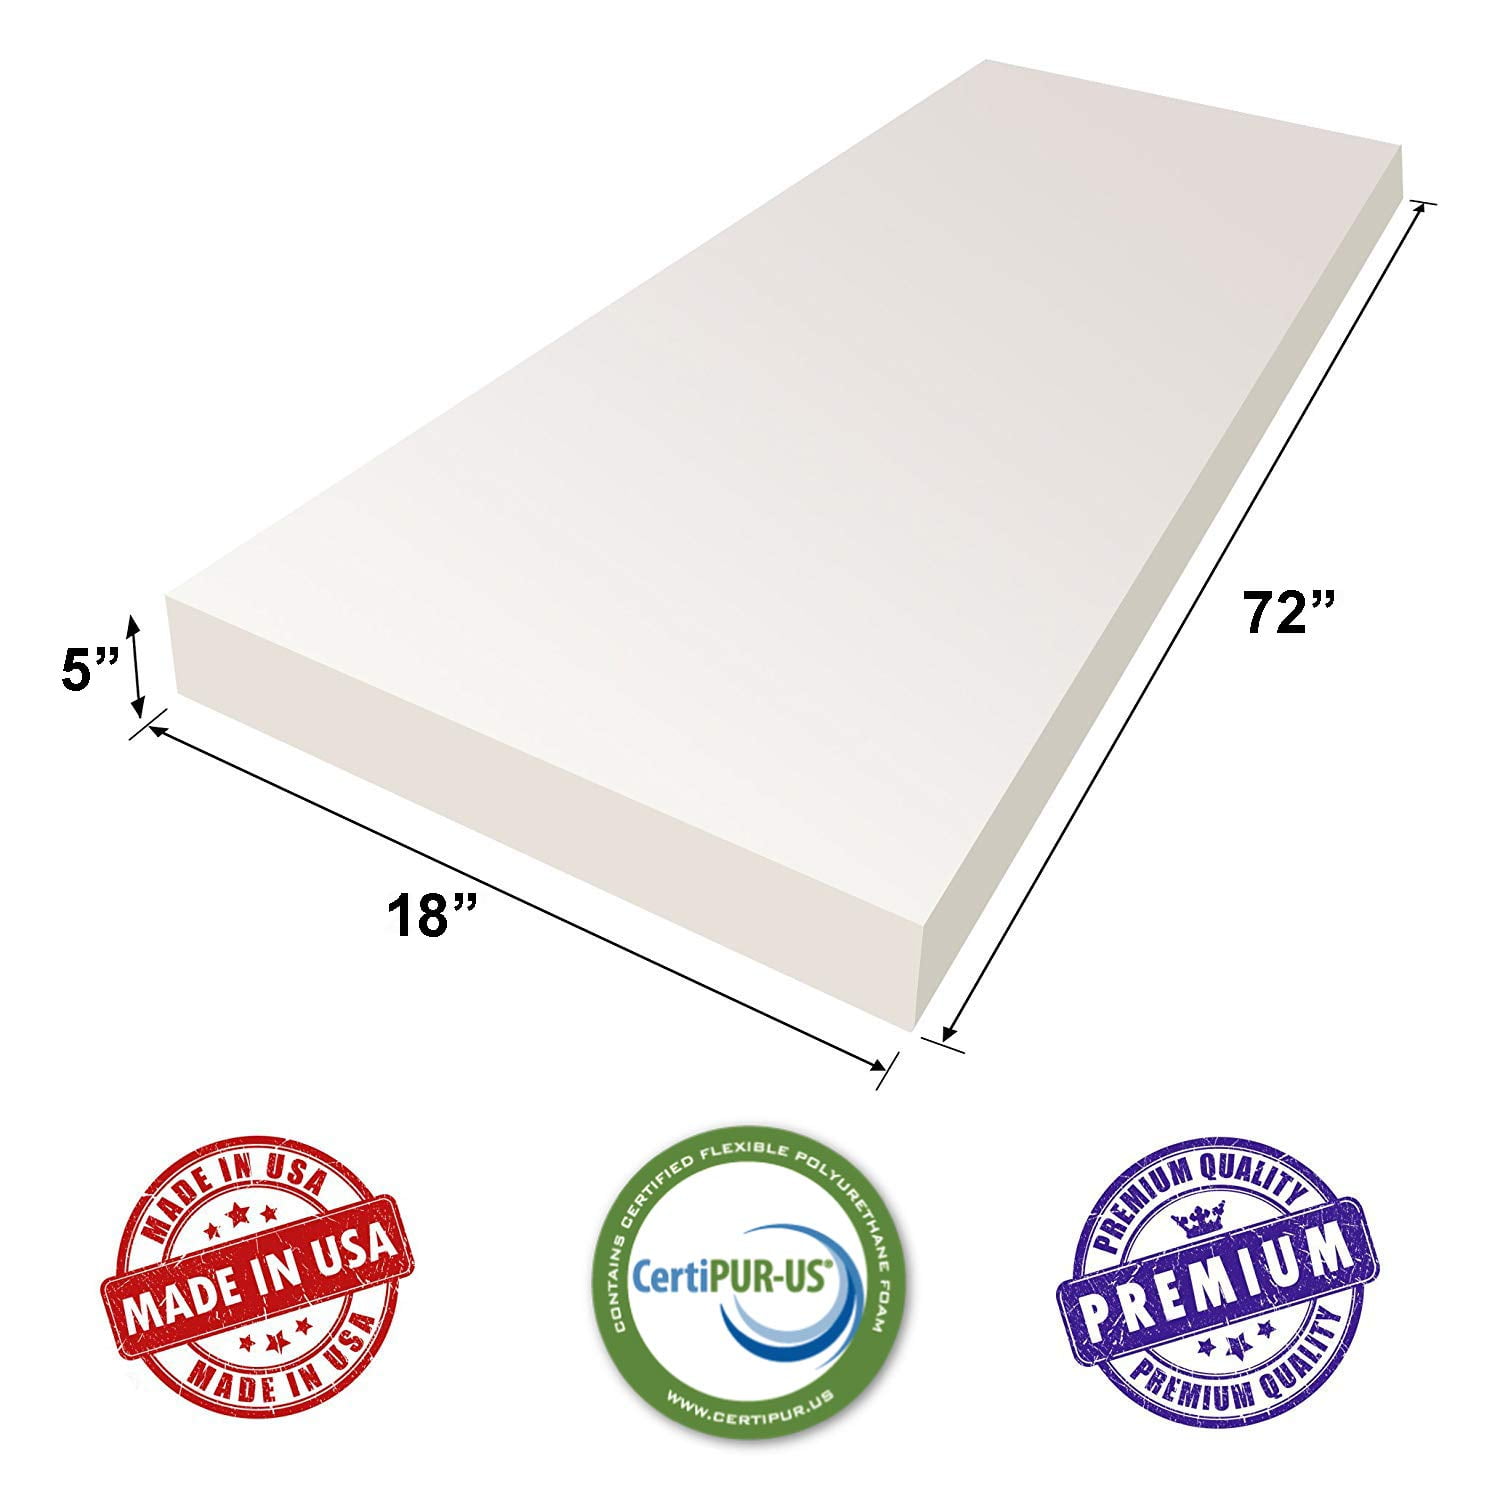  FoamTouch 6 X 36 X 72 Upholstery Foam Cushion High Density  Standard (Seat Replacement, Upholstery Sheet, Foam Padding, Bed Padding) :  Arts, Crafts & Sewing